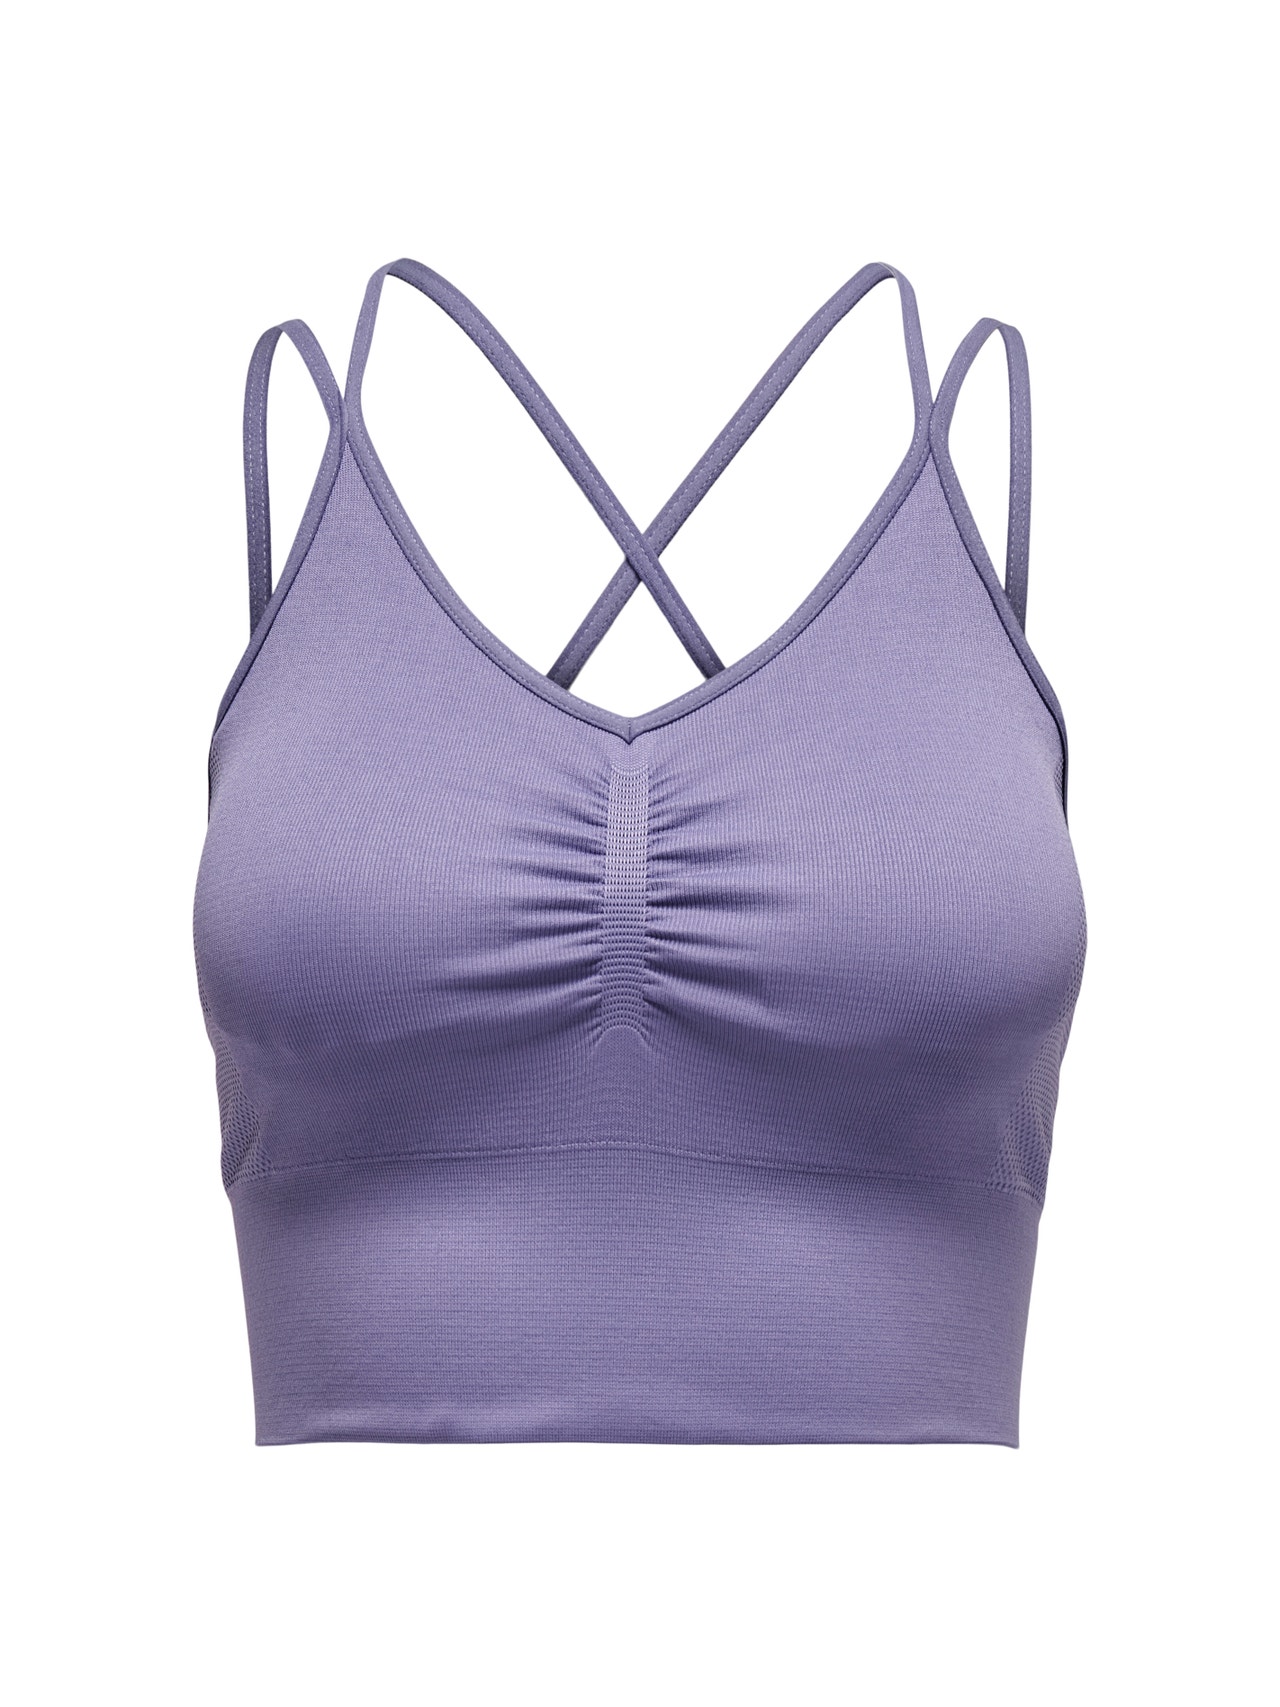 ONLY Sports bh med medium support -Aster Purple - 15280591